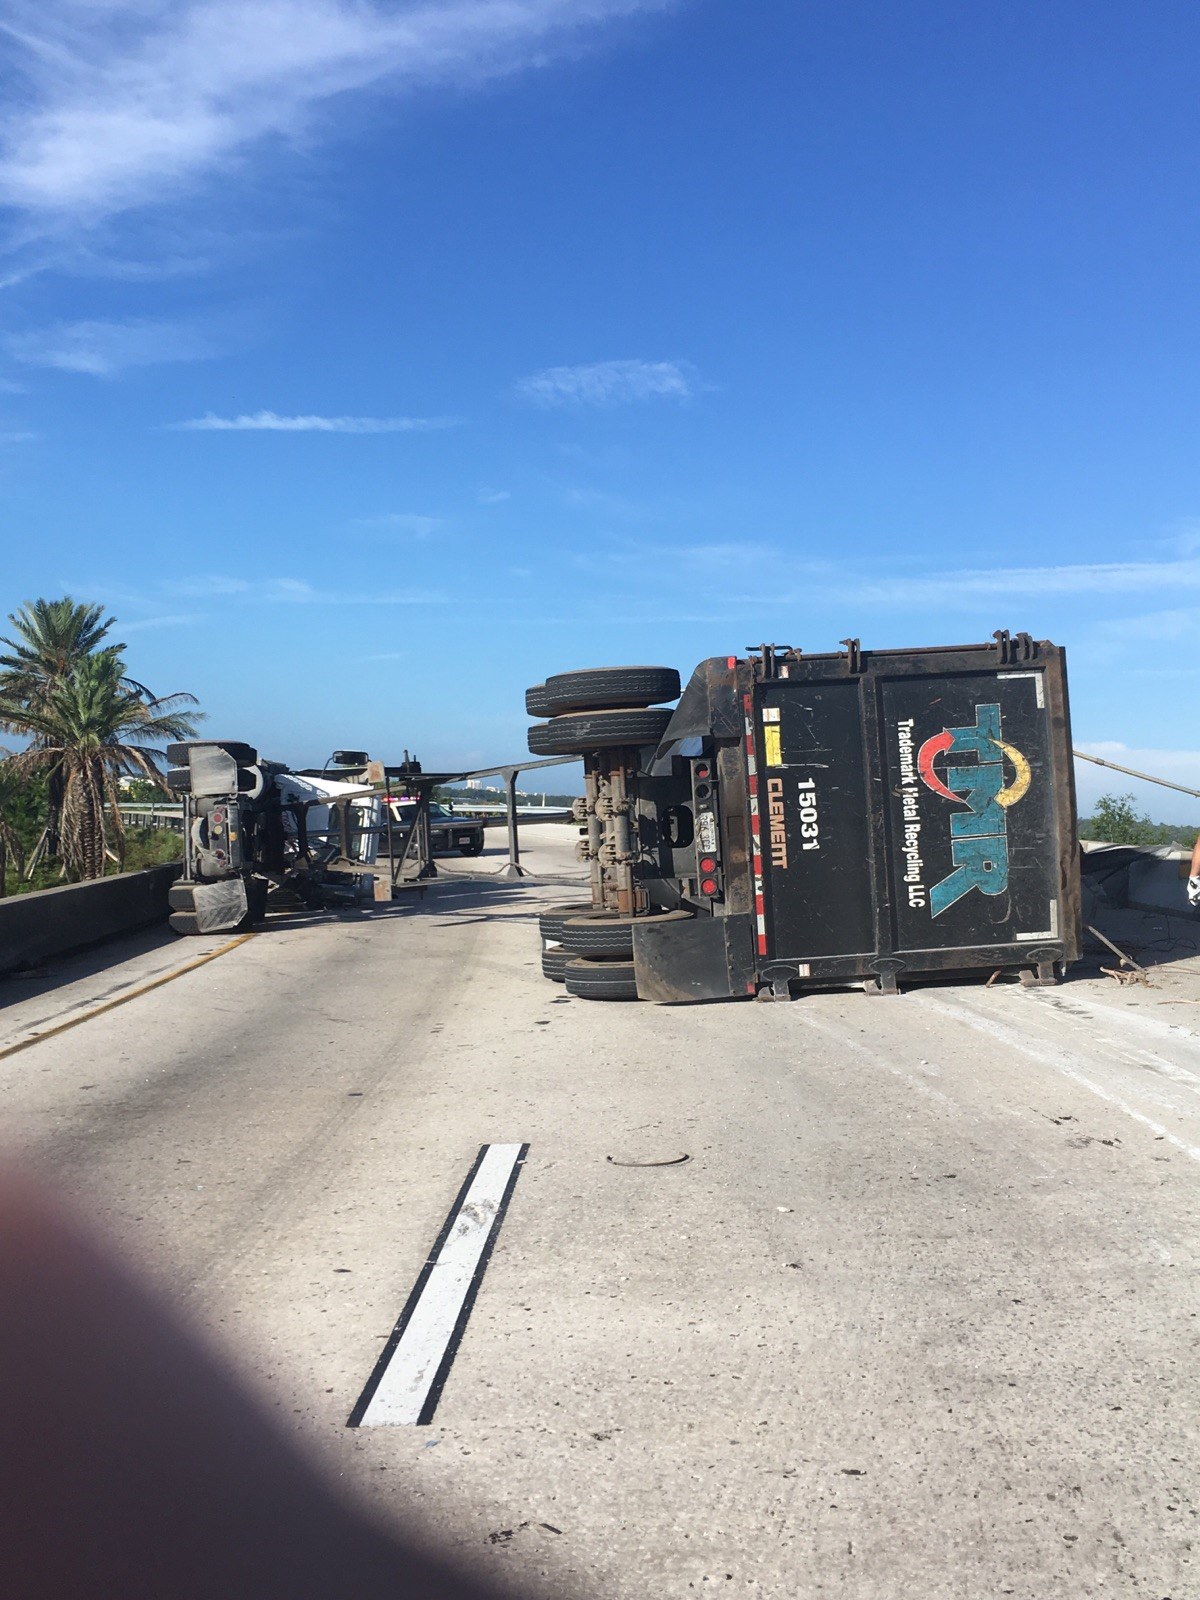 PHOTO: A man survived after a large piece of scrap metal fell from a truck that lost control and overturned on a highway, crushing his vehicle under the overpass, Orange County, Fla., July 15, 2017.